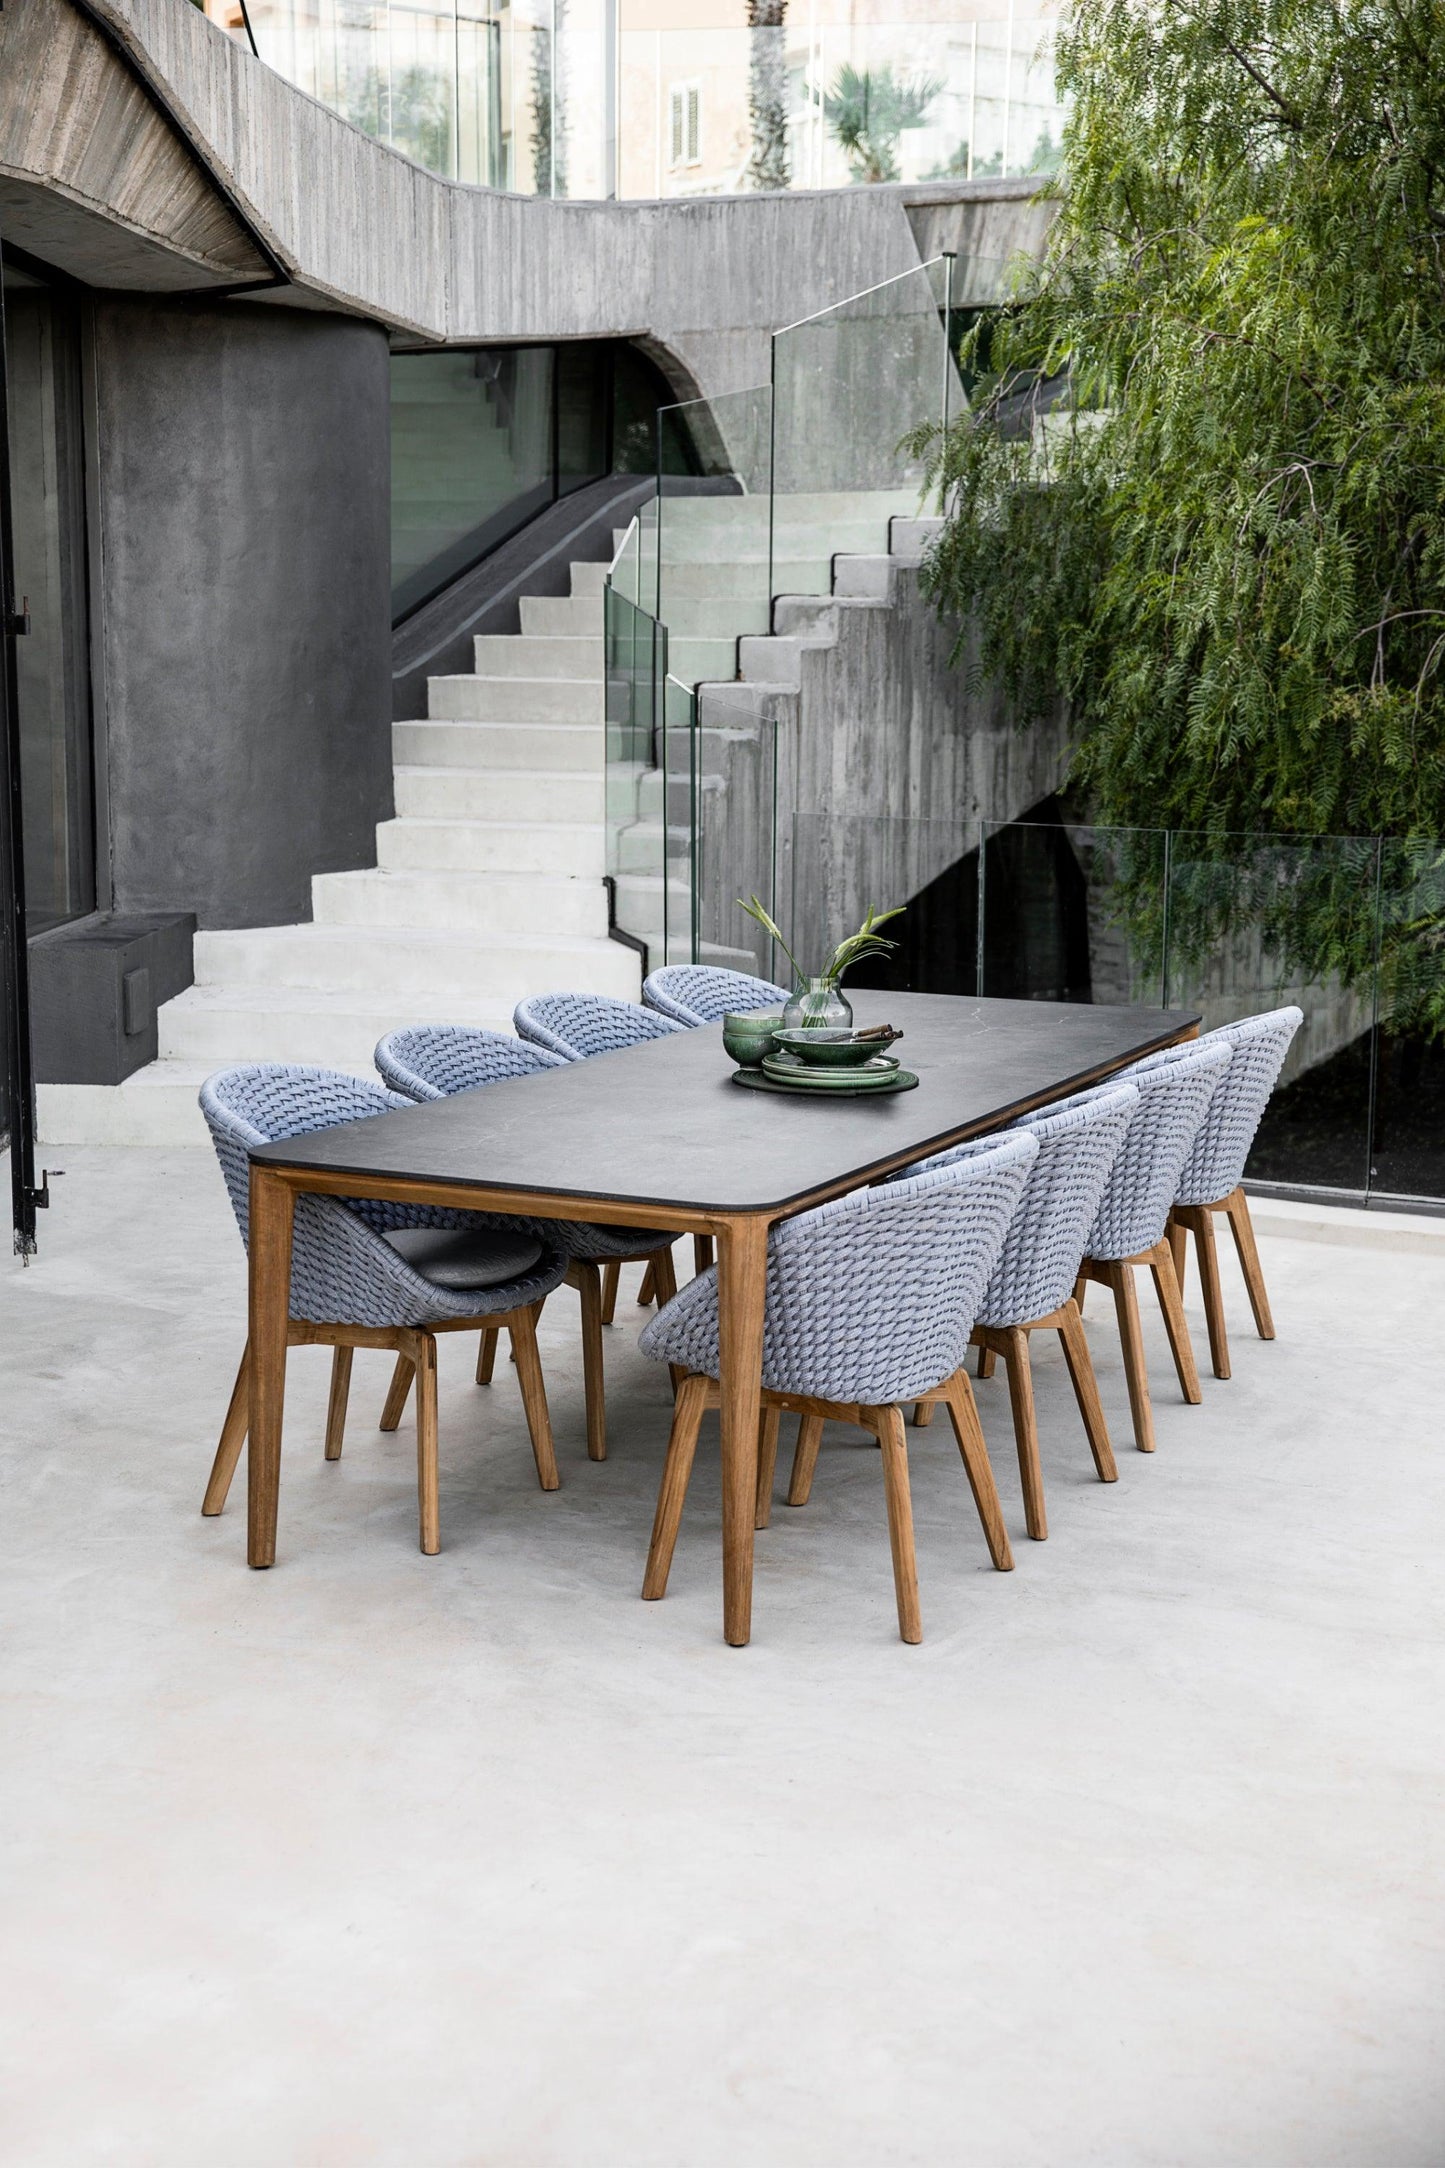 Cane-Line Aspect Dining Set with Peacock Chairs - Garden House Design